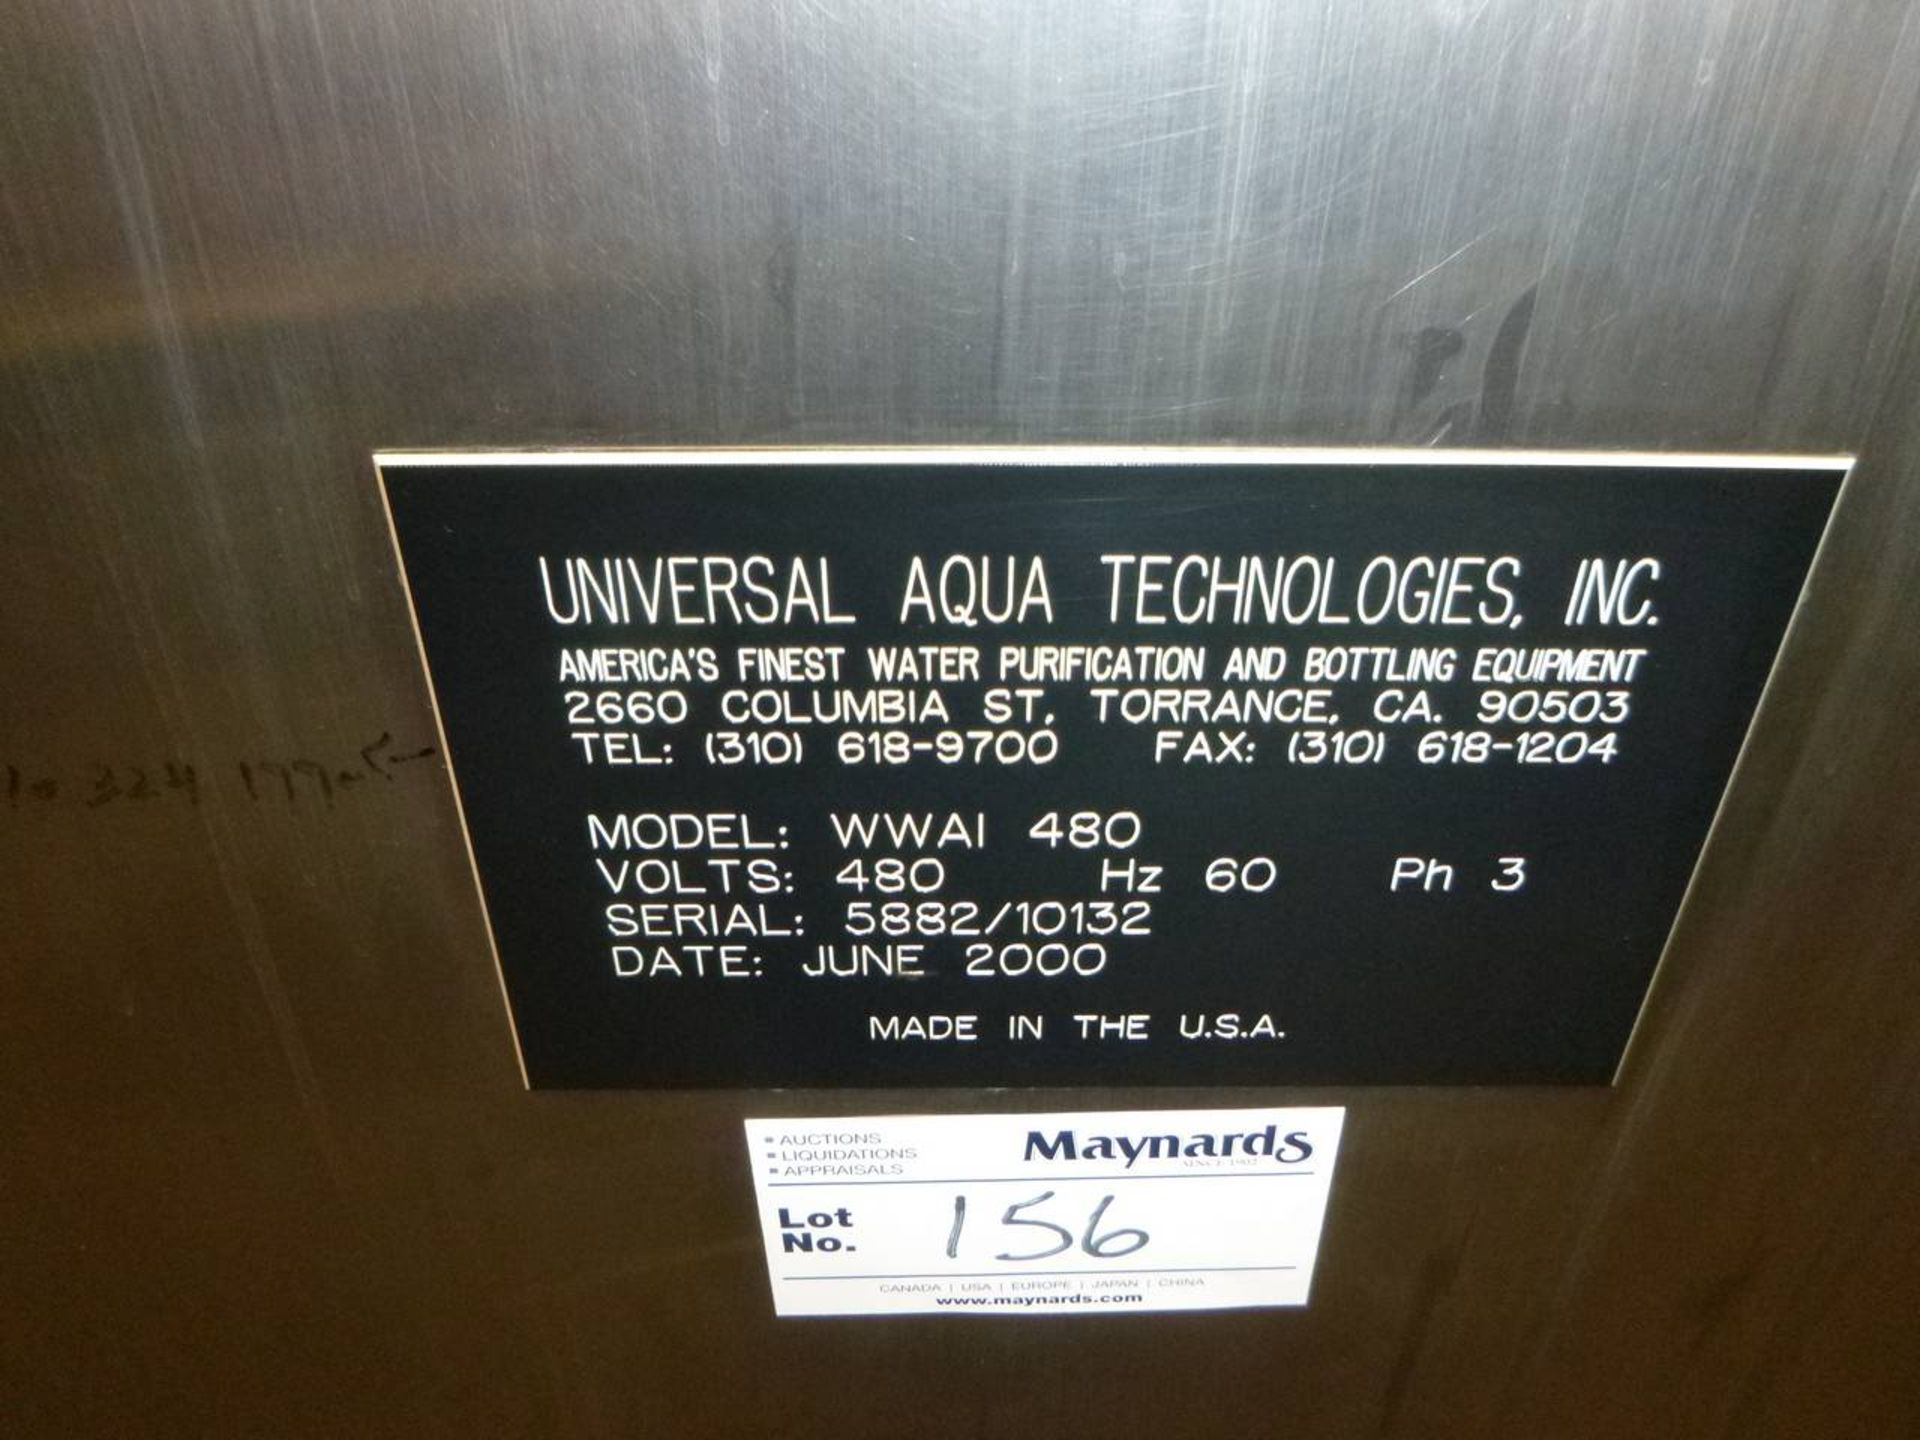 2000 Universial Aqua Technologies Inc WWAI 480 Fully automatic washer filler capping machine - Image 5 of 18